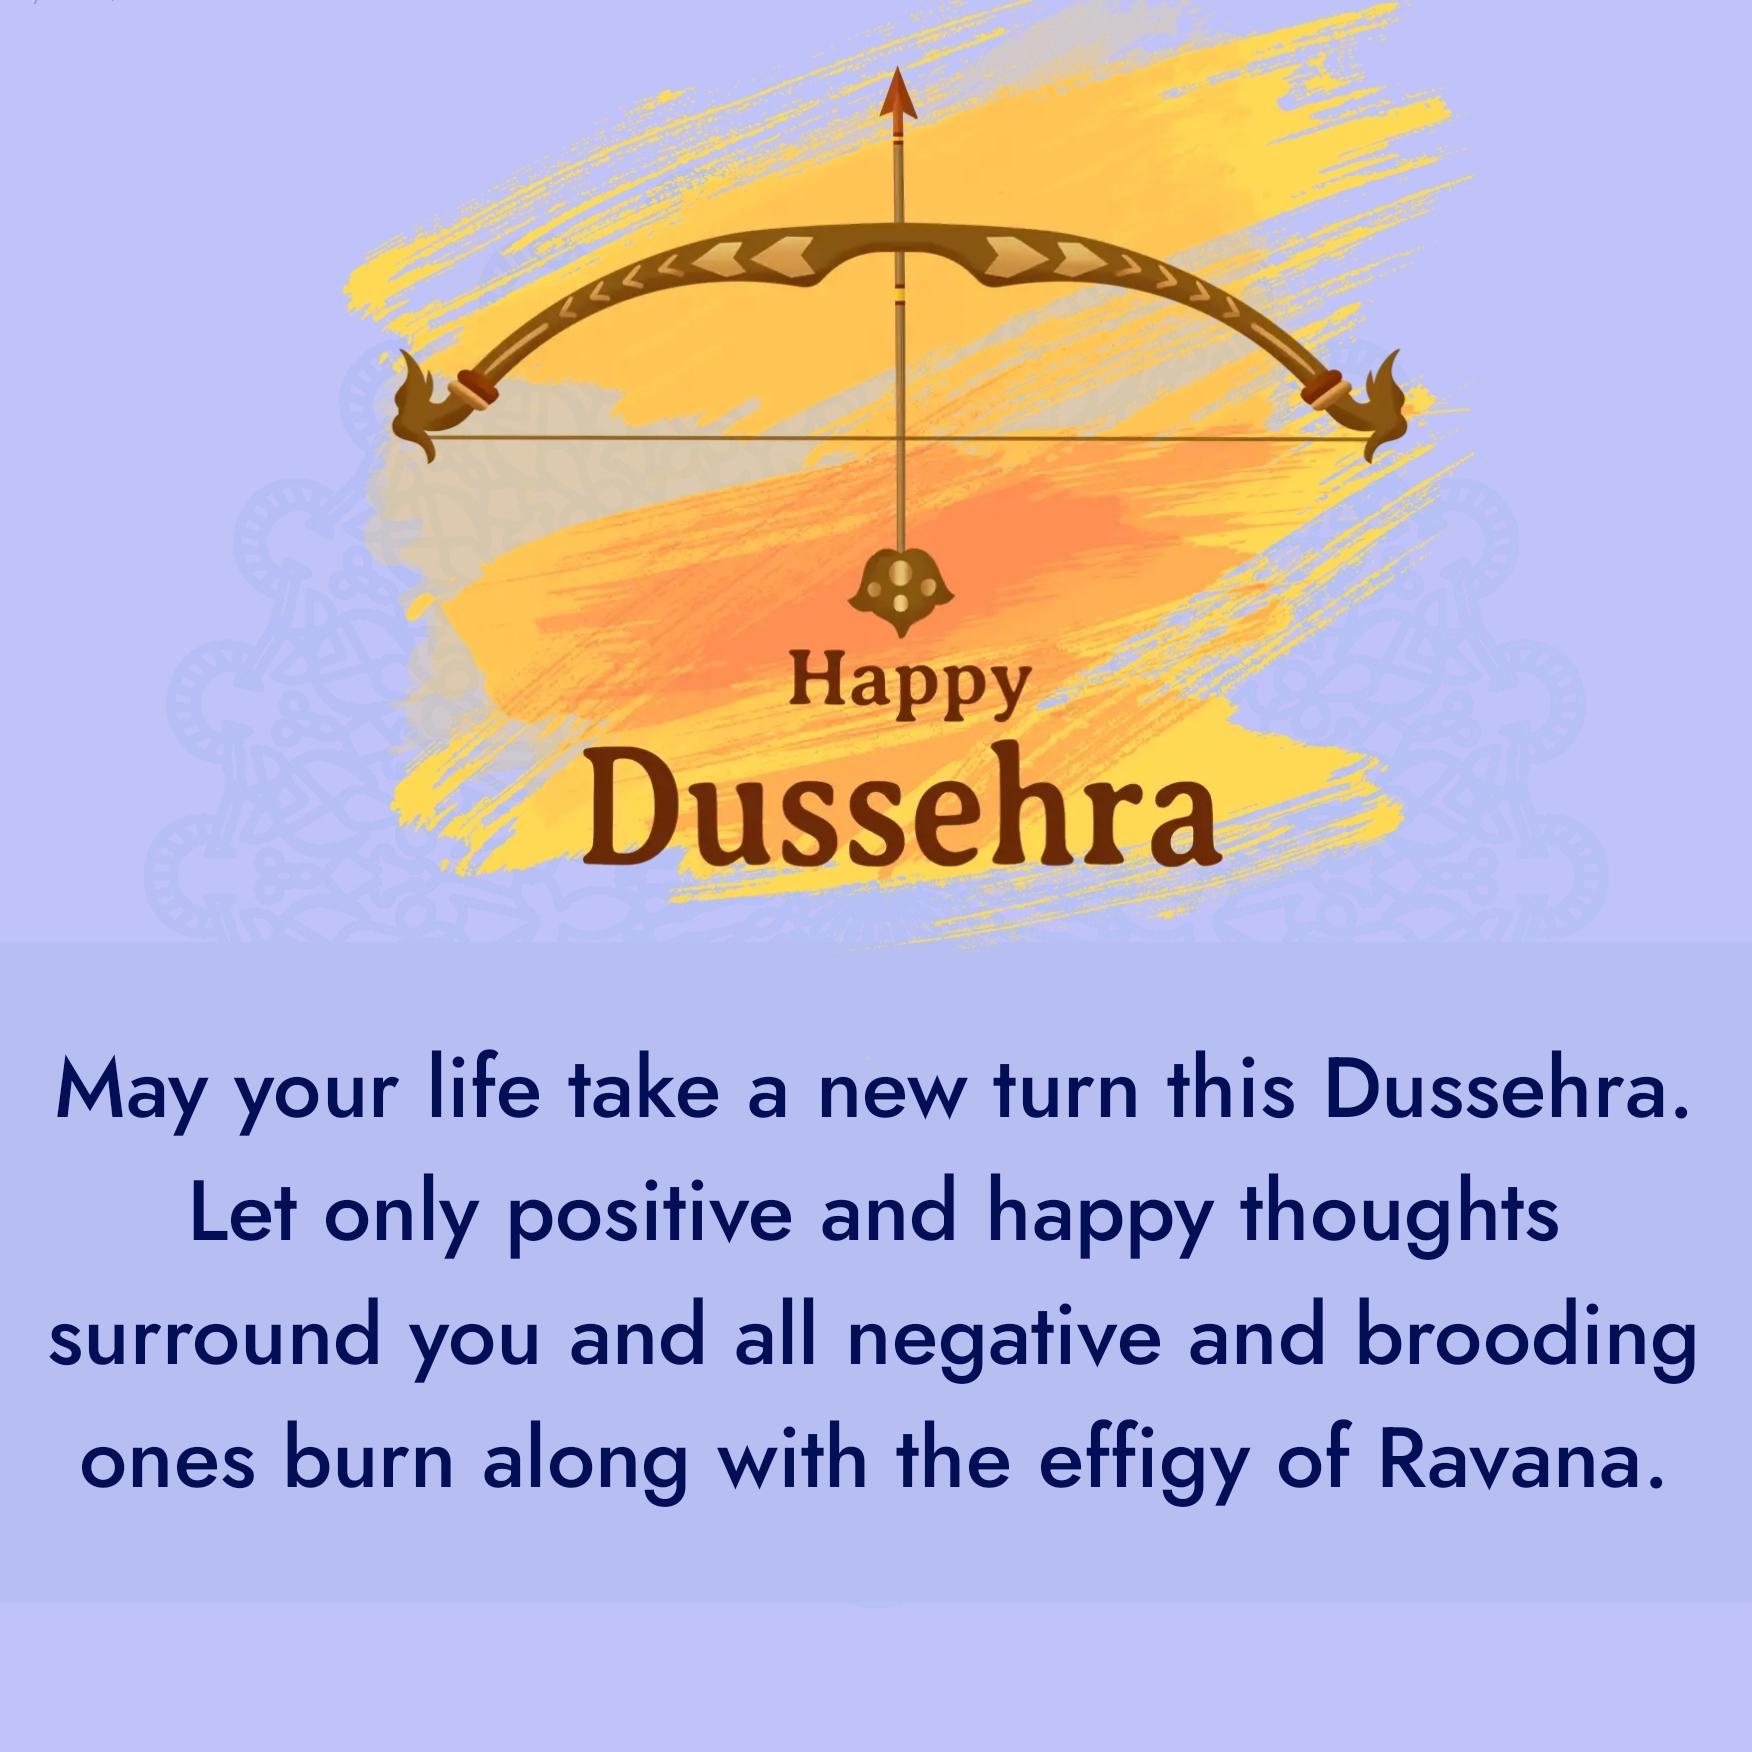 May your life take a new turn this Dussehra